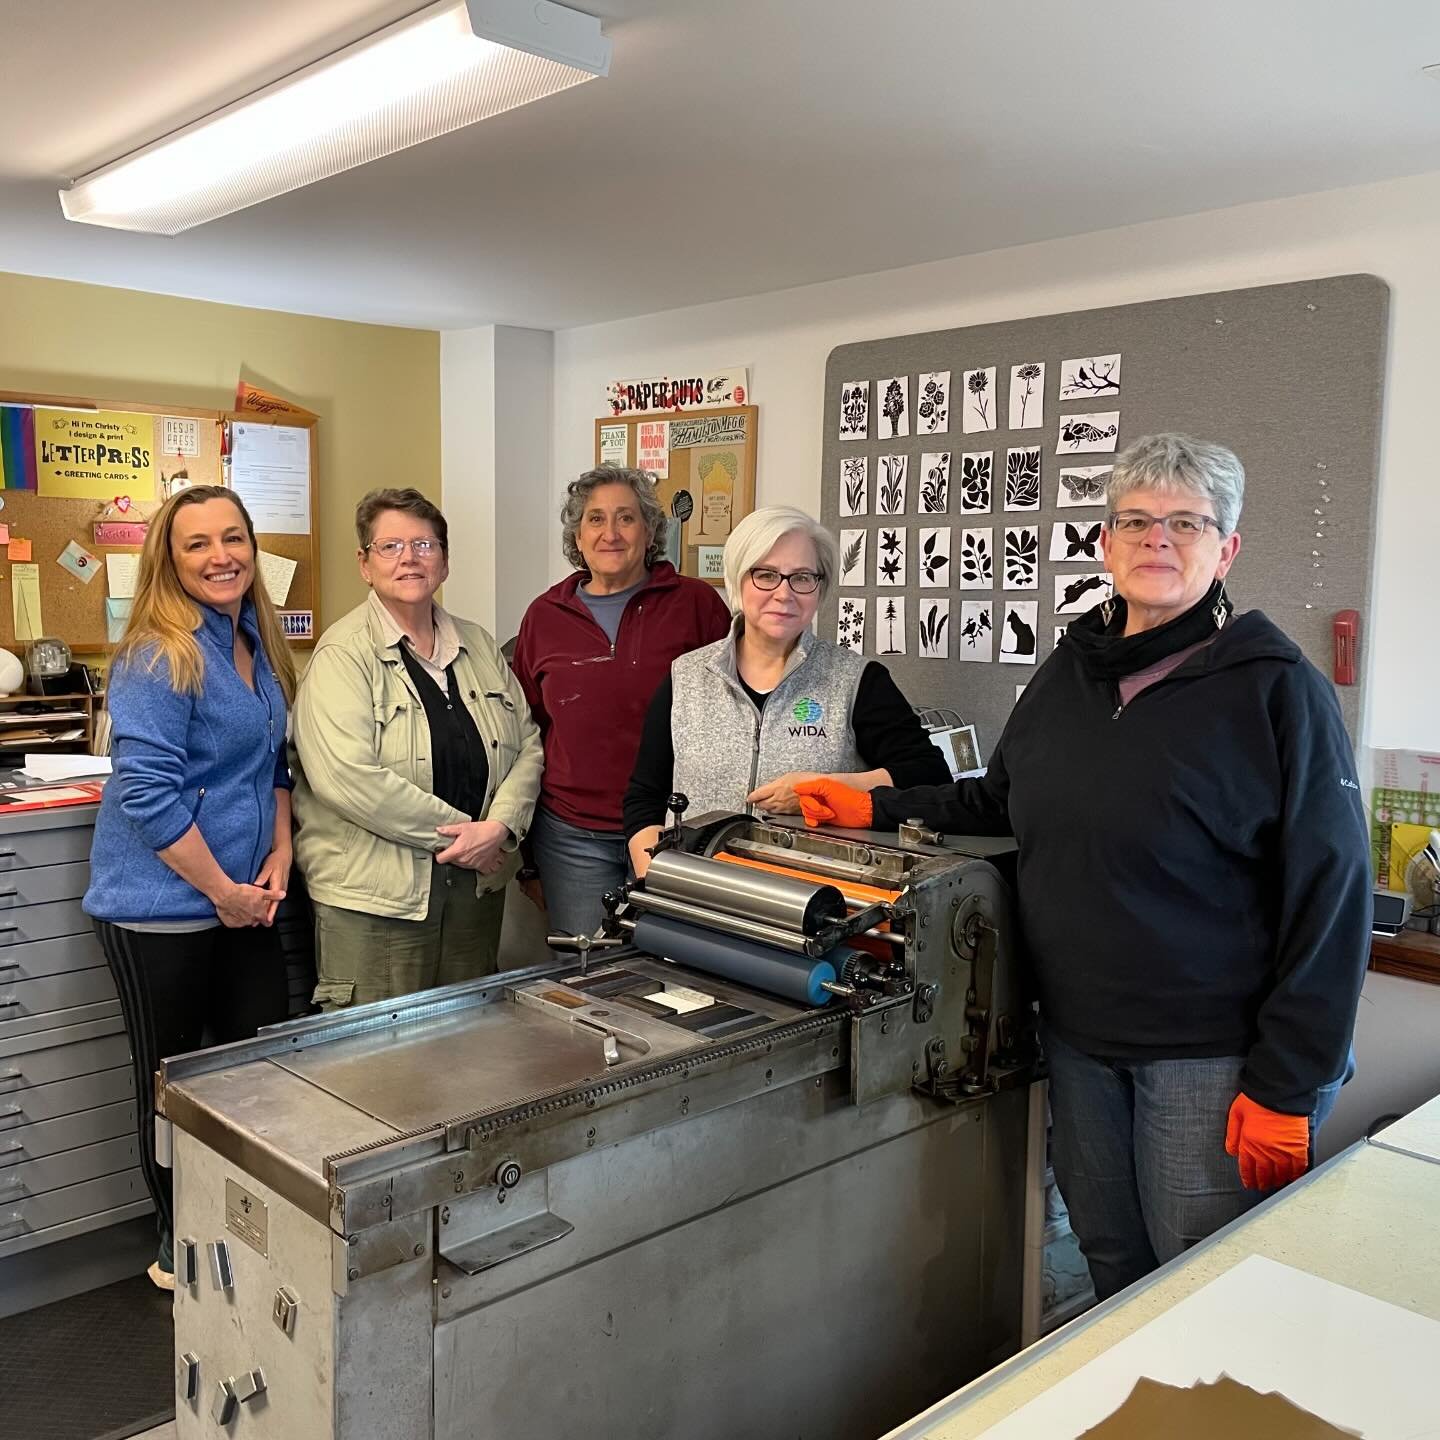 We had a delightful, afternoon block printing class in our studio today. Everyone did great work! 👏

#wisconsinletterpress 
#linocutclass 
#creativeafternoon